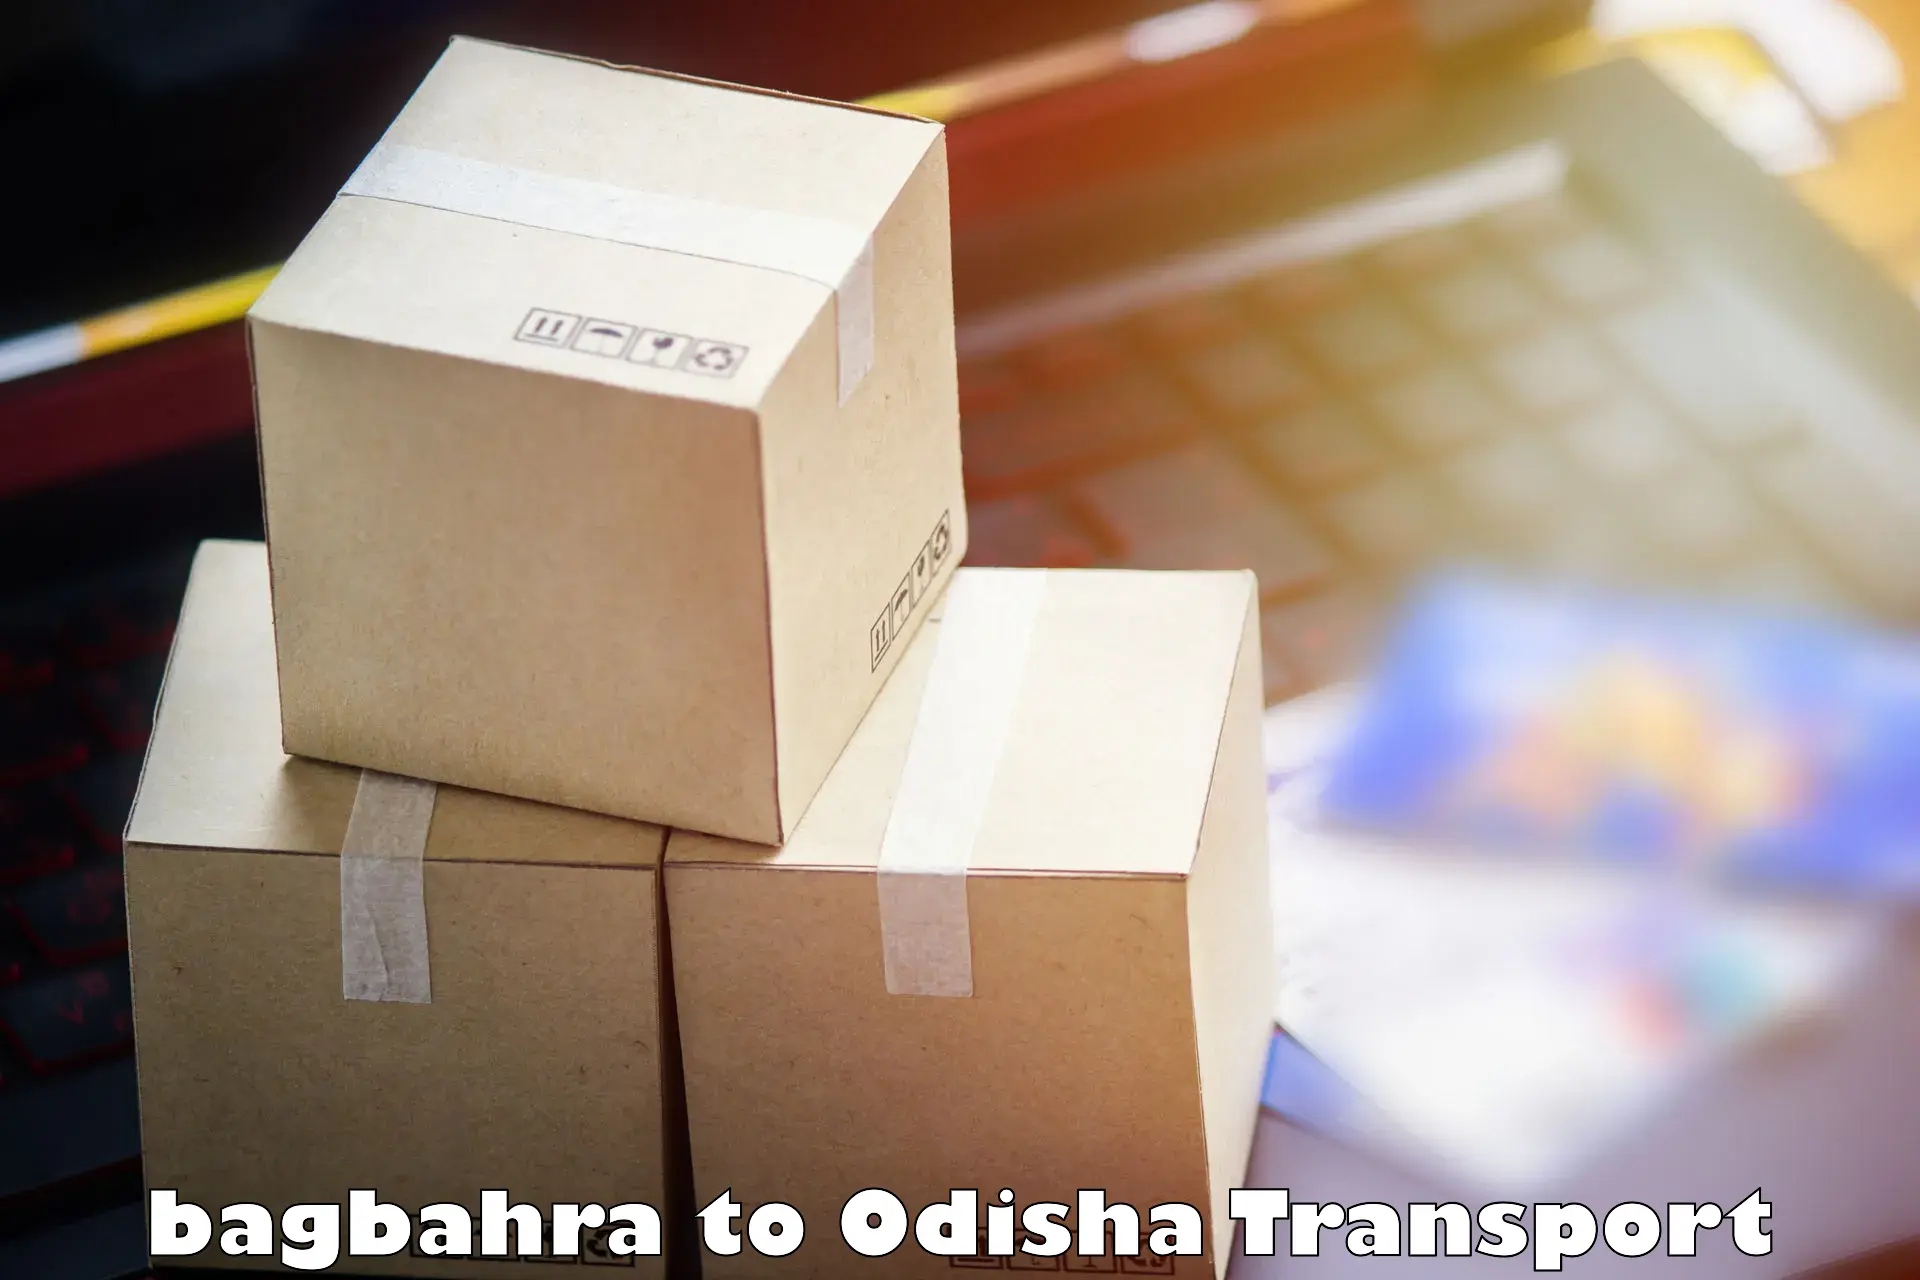 Express transport services bagbahra to Loisingha